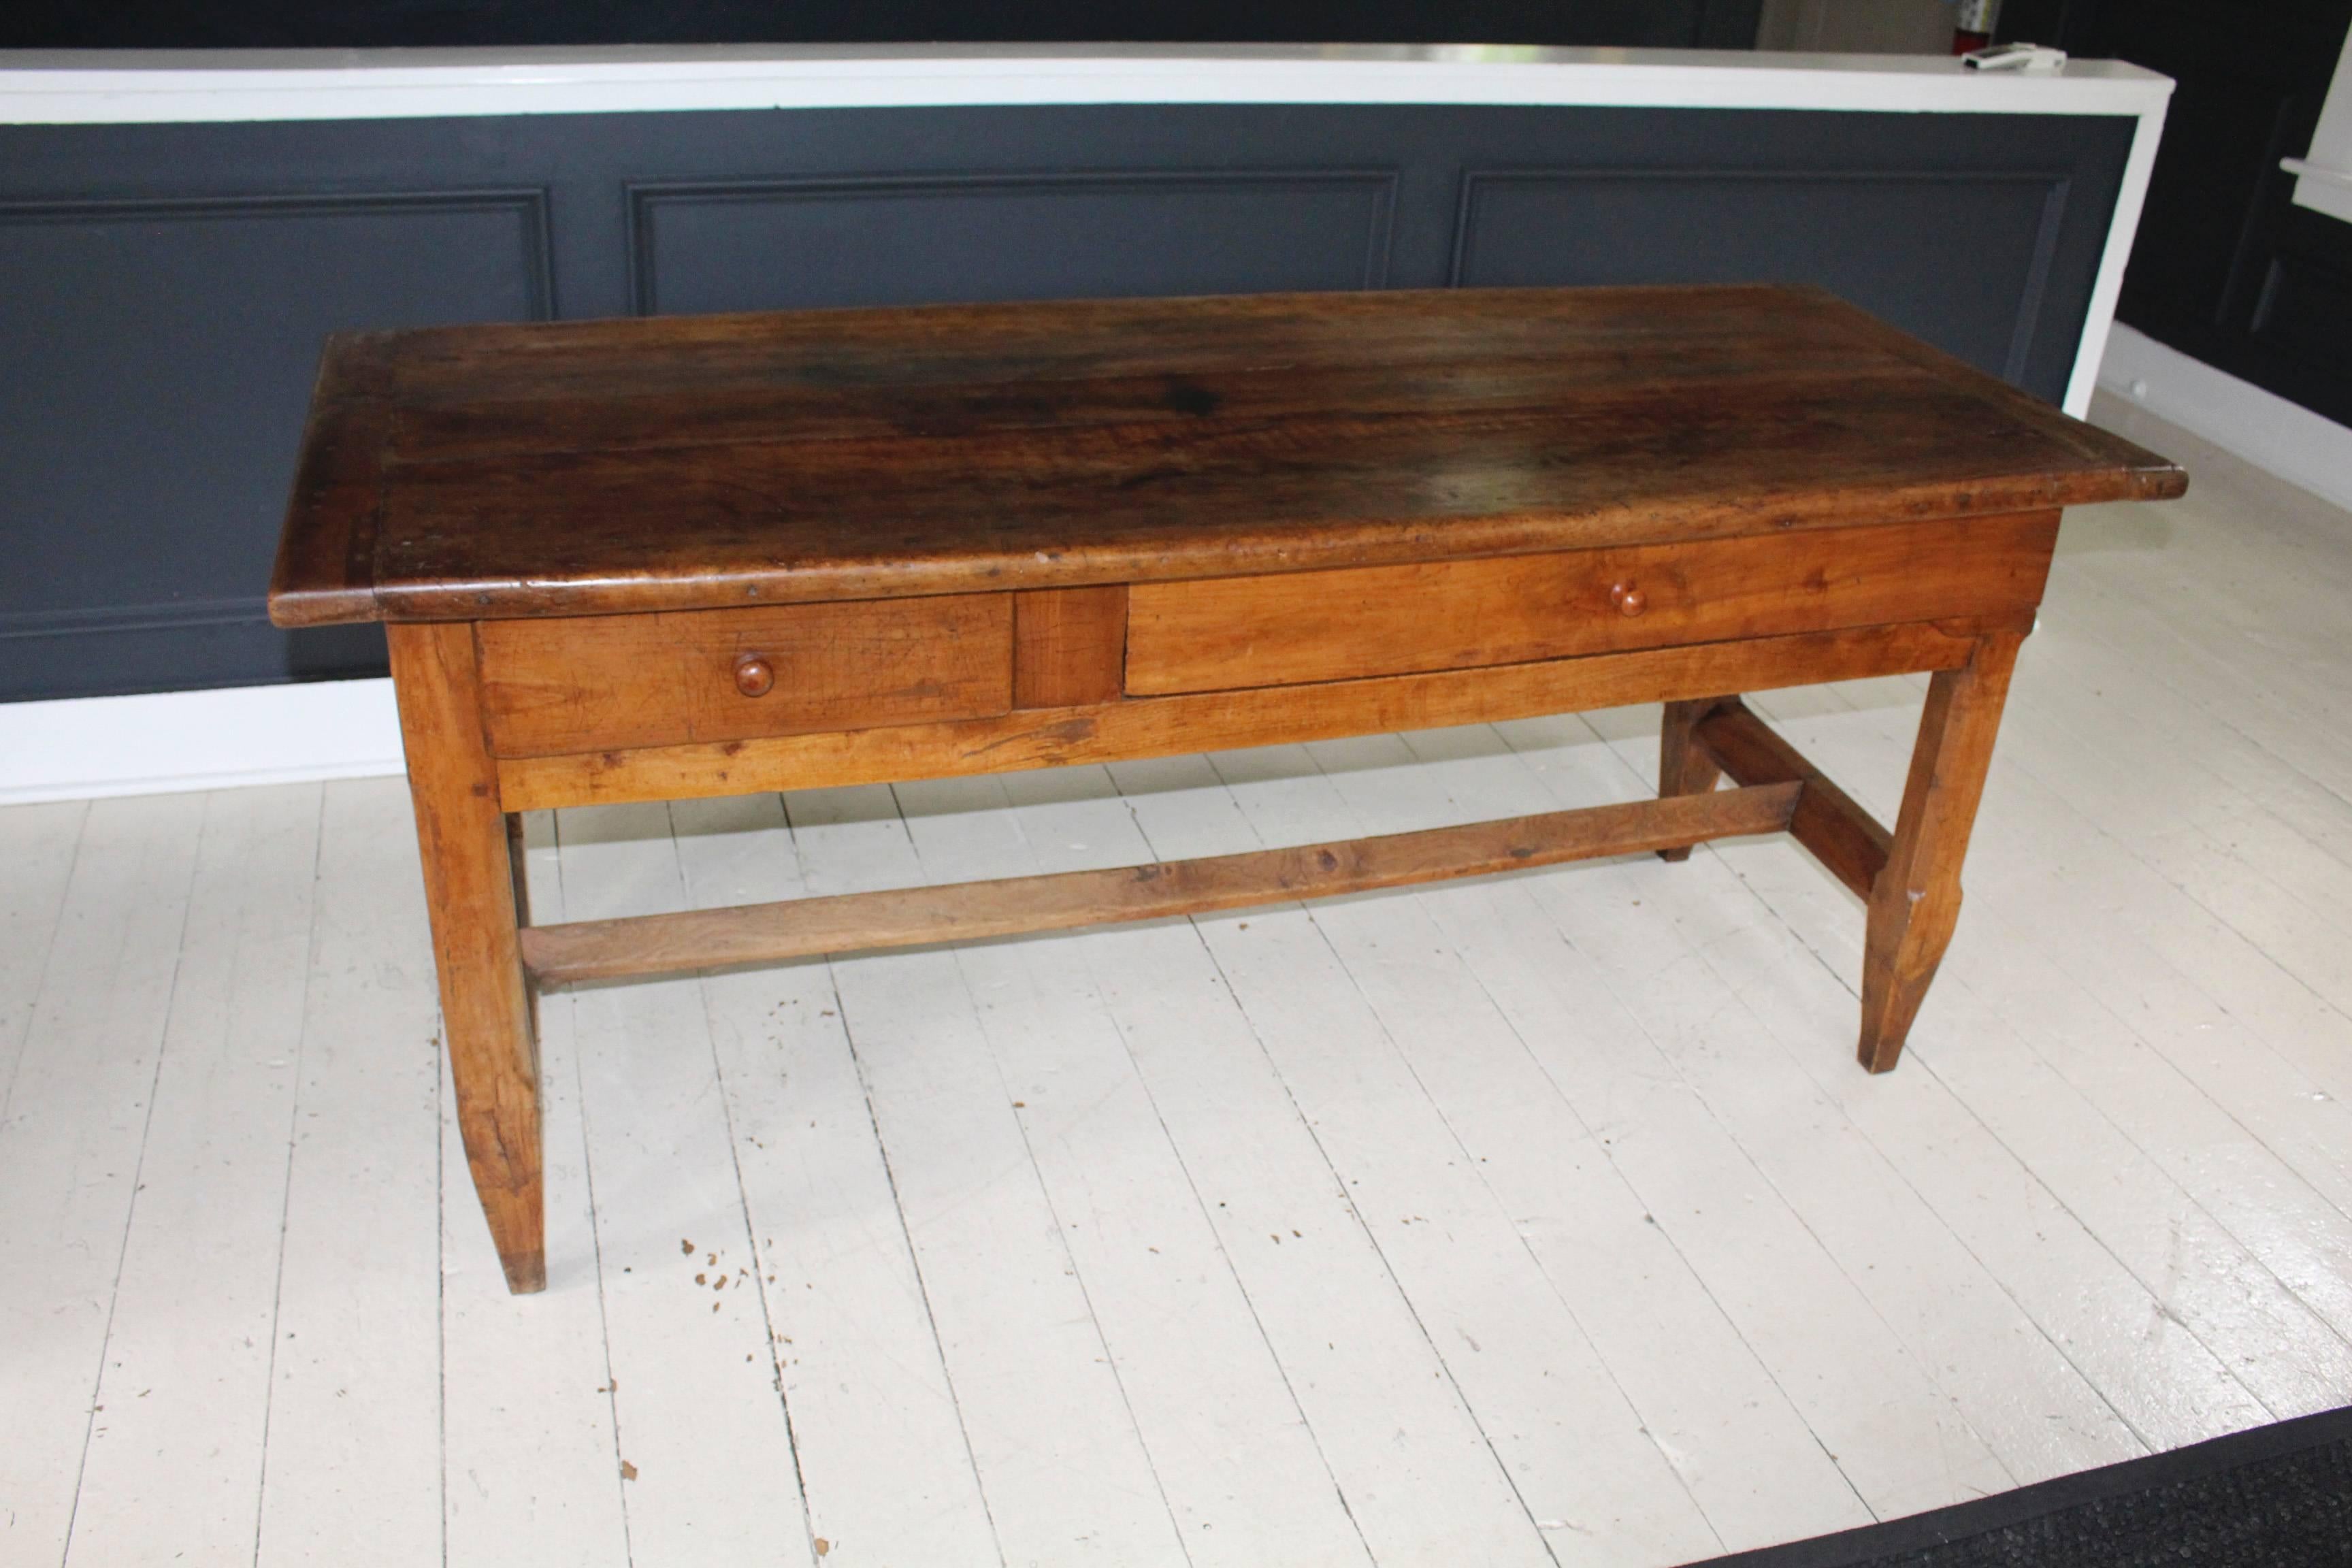 19th century France 'Grassoise' farm table with secret hiding compartment concealed behind right-hand elongated sliding drawer door. Tabletop has breadboard ends and sits atop an angled stretcher base joining tapered legs.